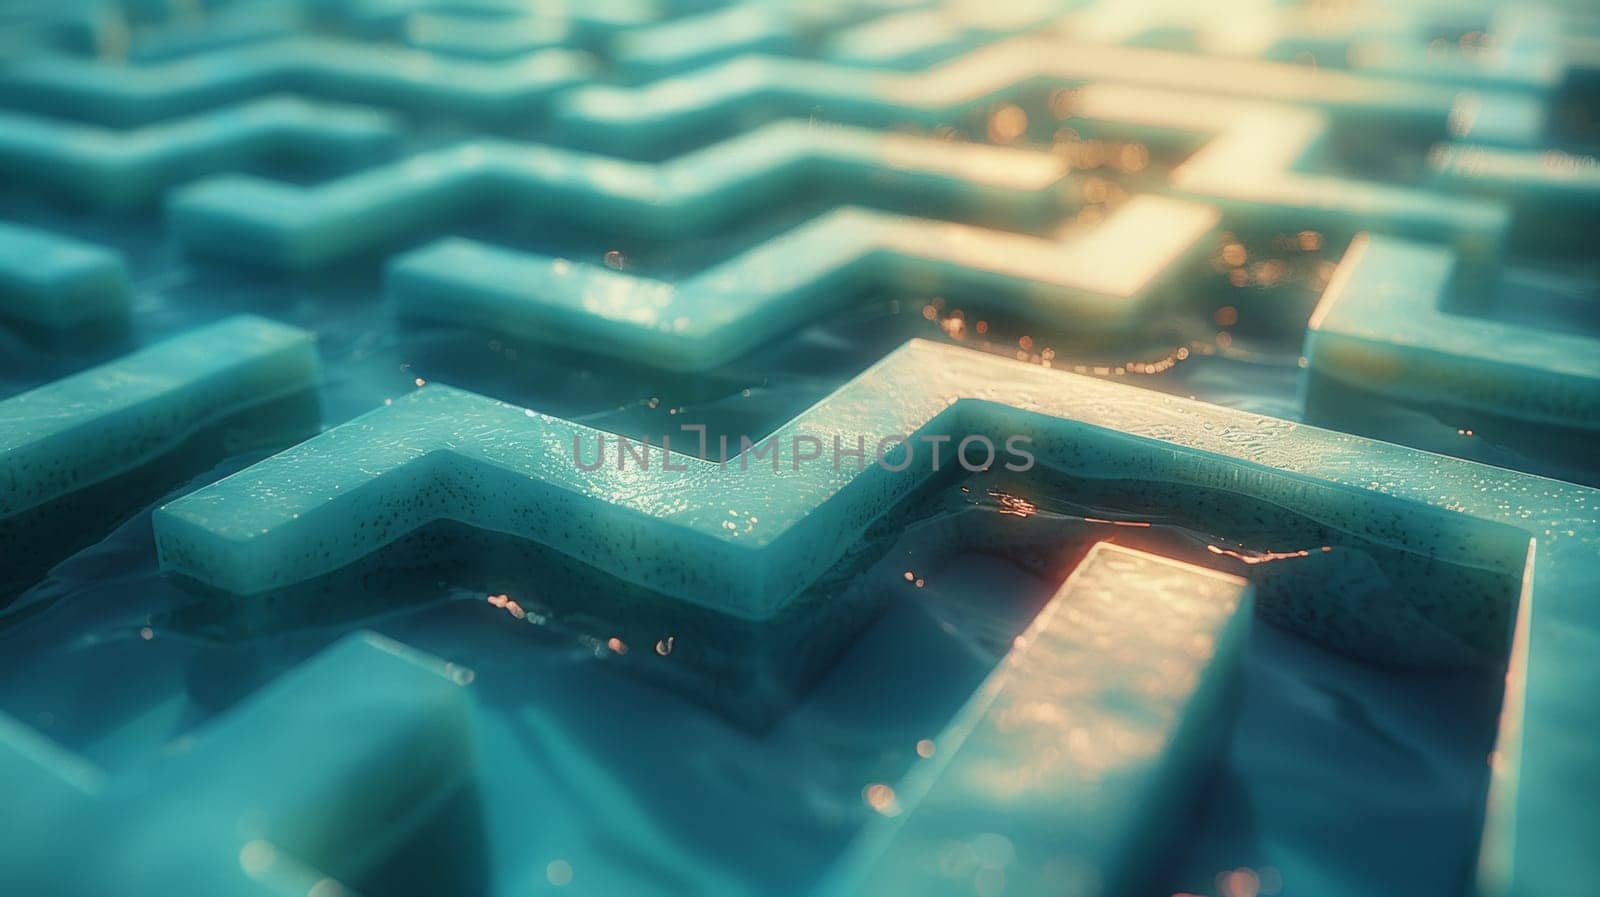 A close up of a maze with water running through it